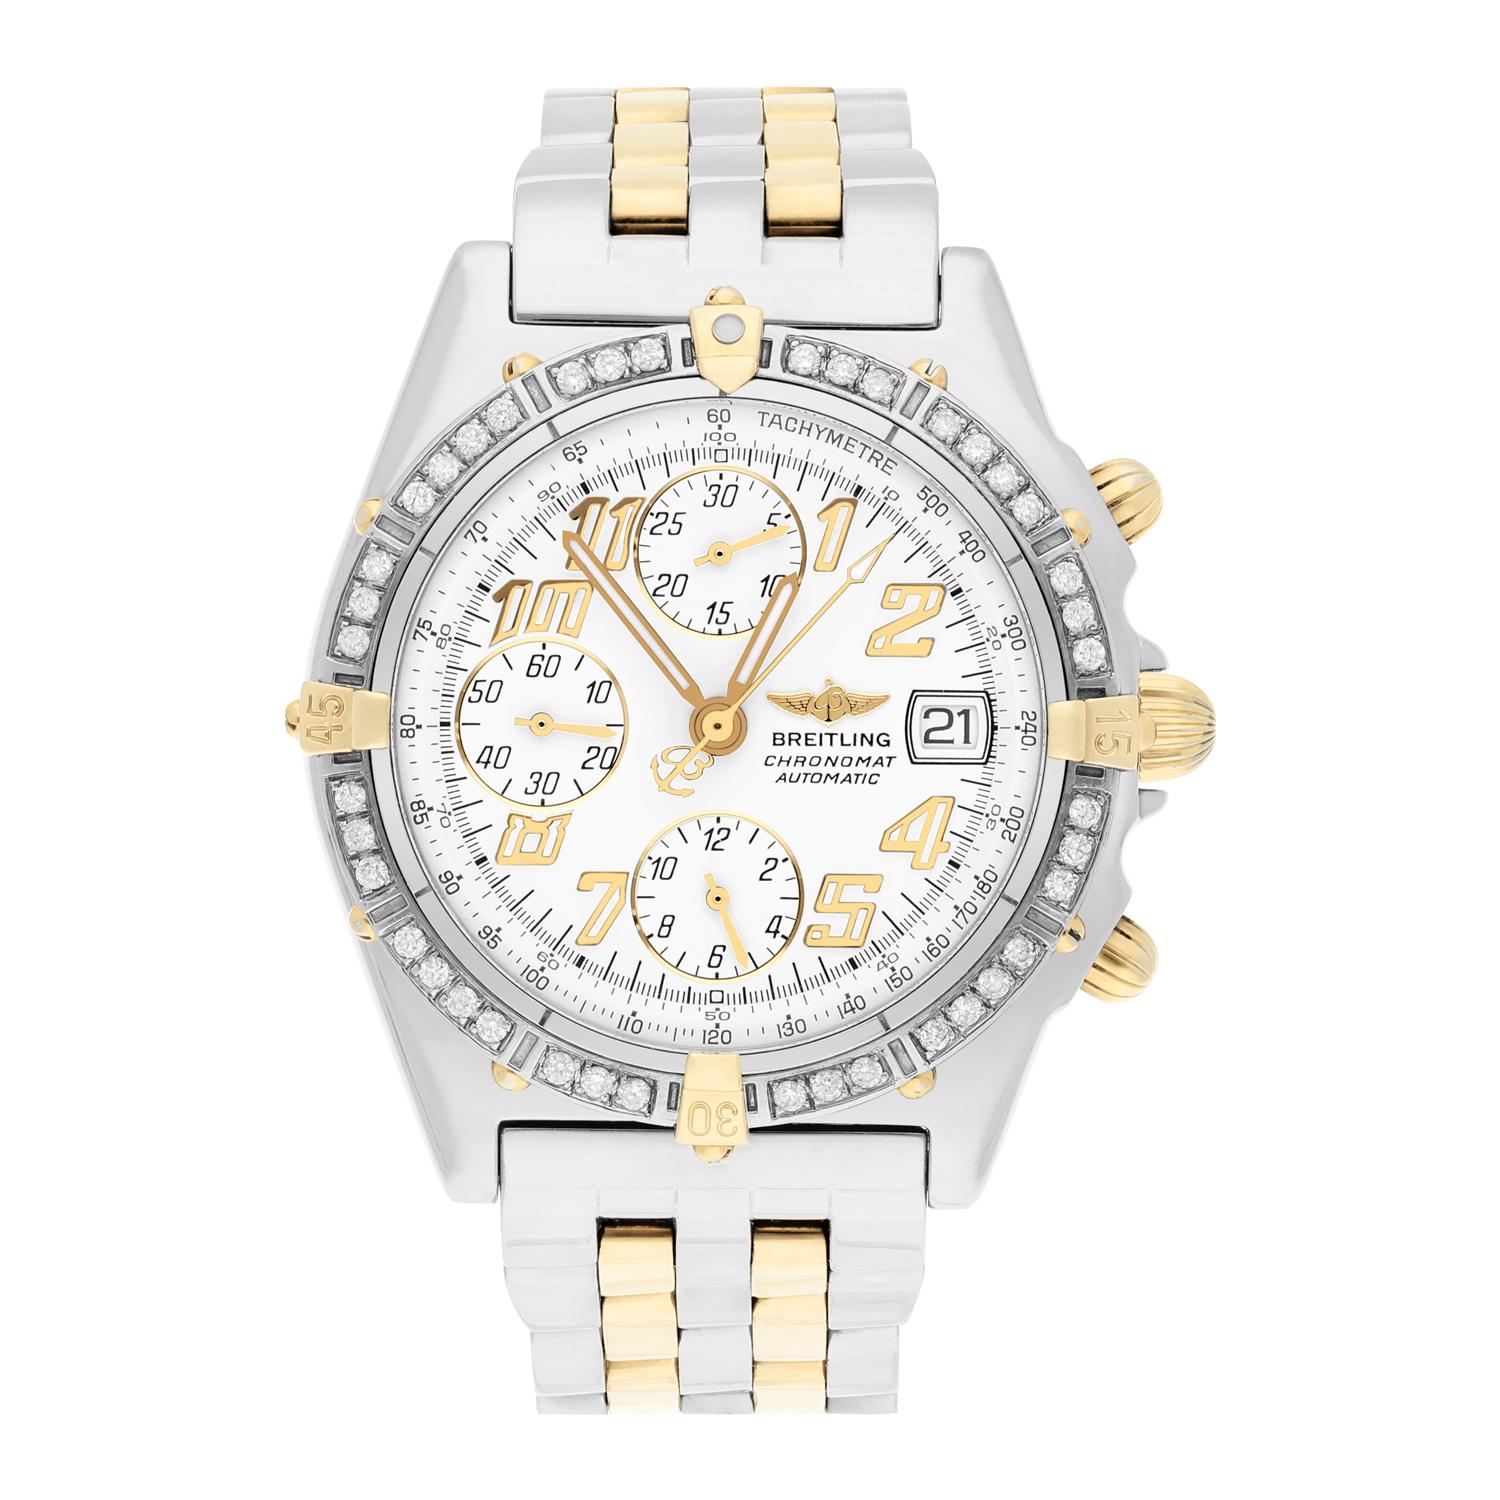 Brand: Breitling 
Series: Chronomat  
Model: B13350
Case Diameter: 39 mm
Bracelet: Stainless steel/18K Yellow Gold
Bezel: YG, Custom diamond set
Dial: White dial
The sale includes a jewelry watch box and an appraisal certificate which states the